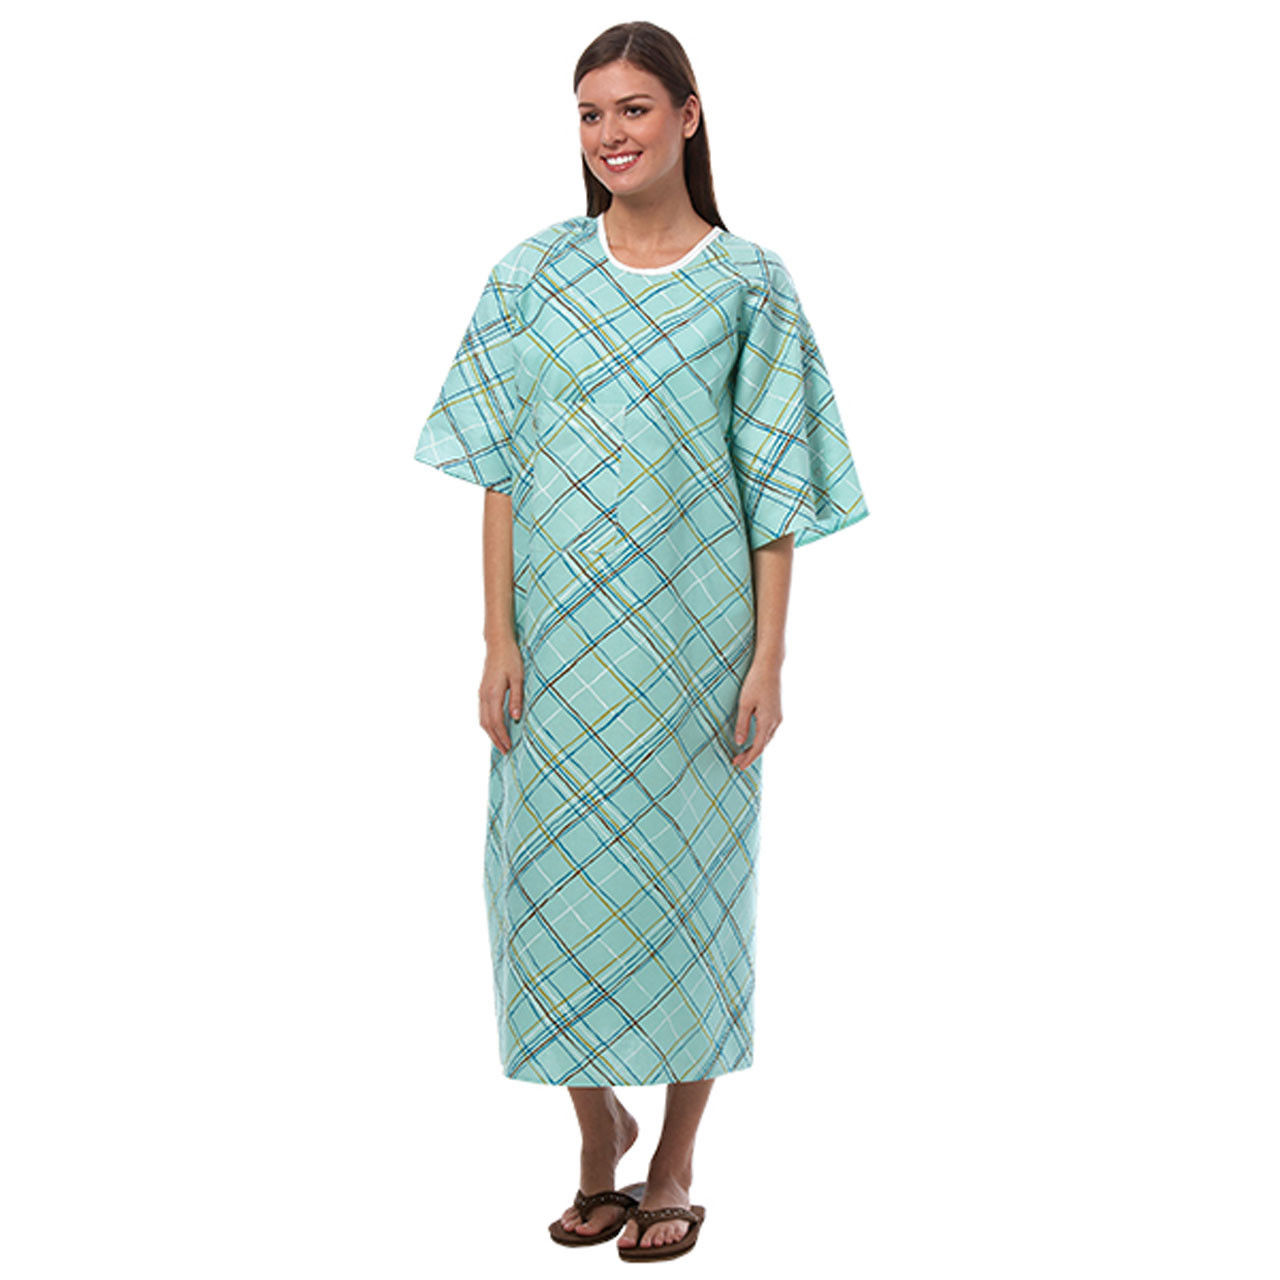 Are these gowns suitable for use in large hospitals?